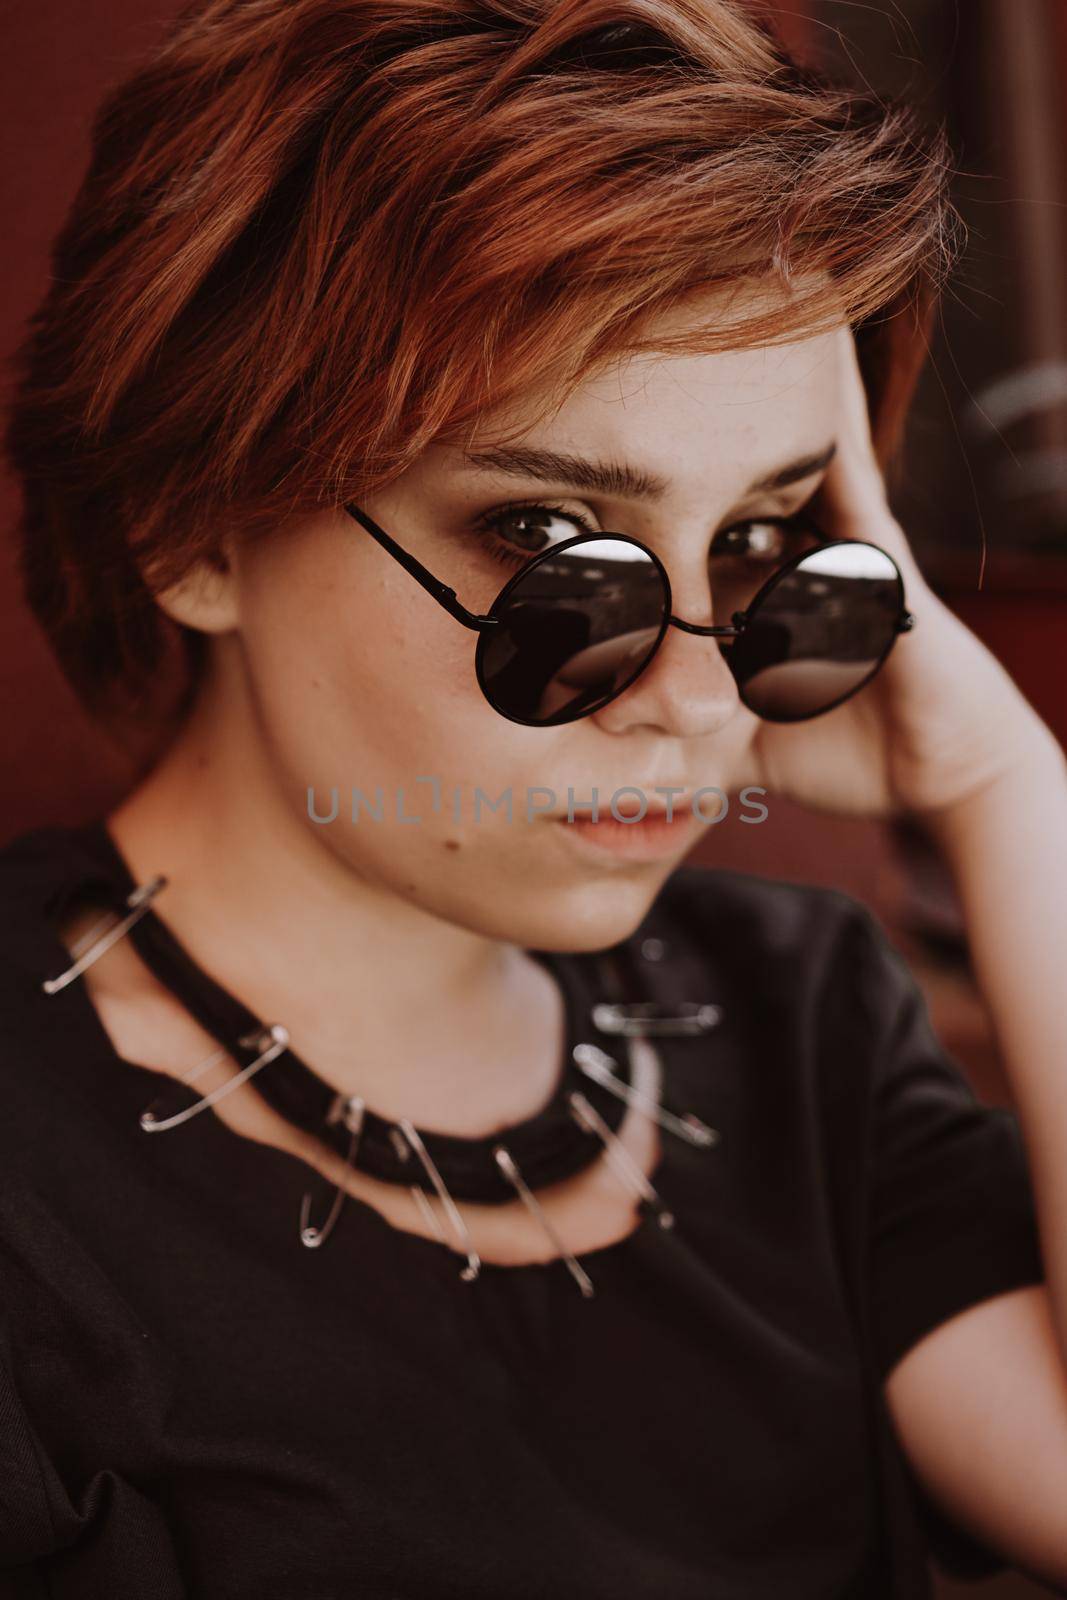 Portrait of attractive cheeky woman with short red hair in sunglasses by natali_brill